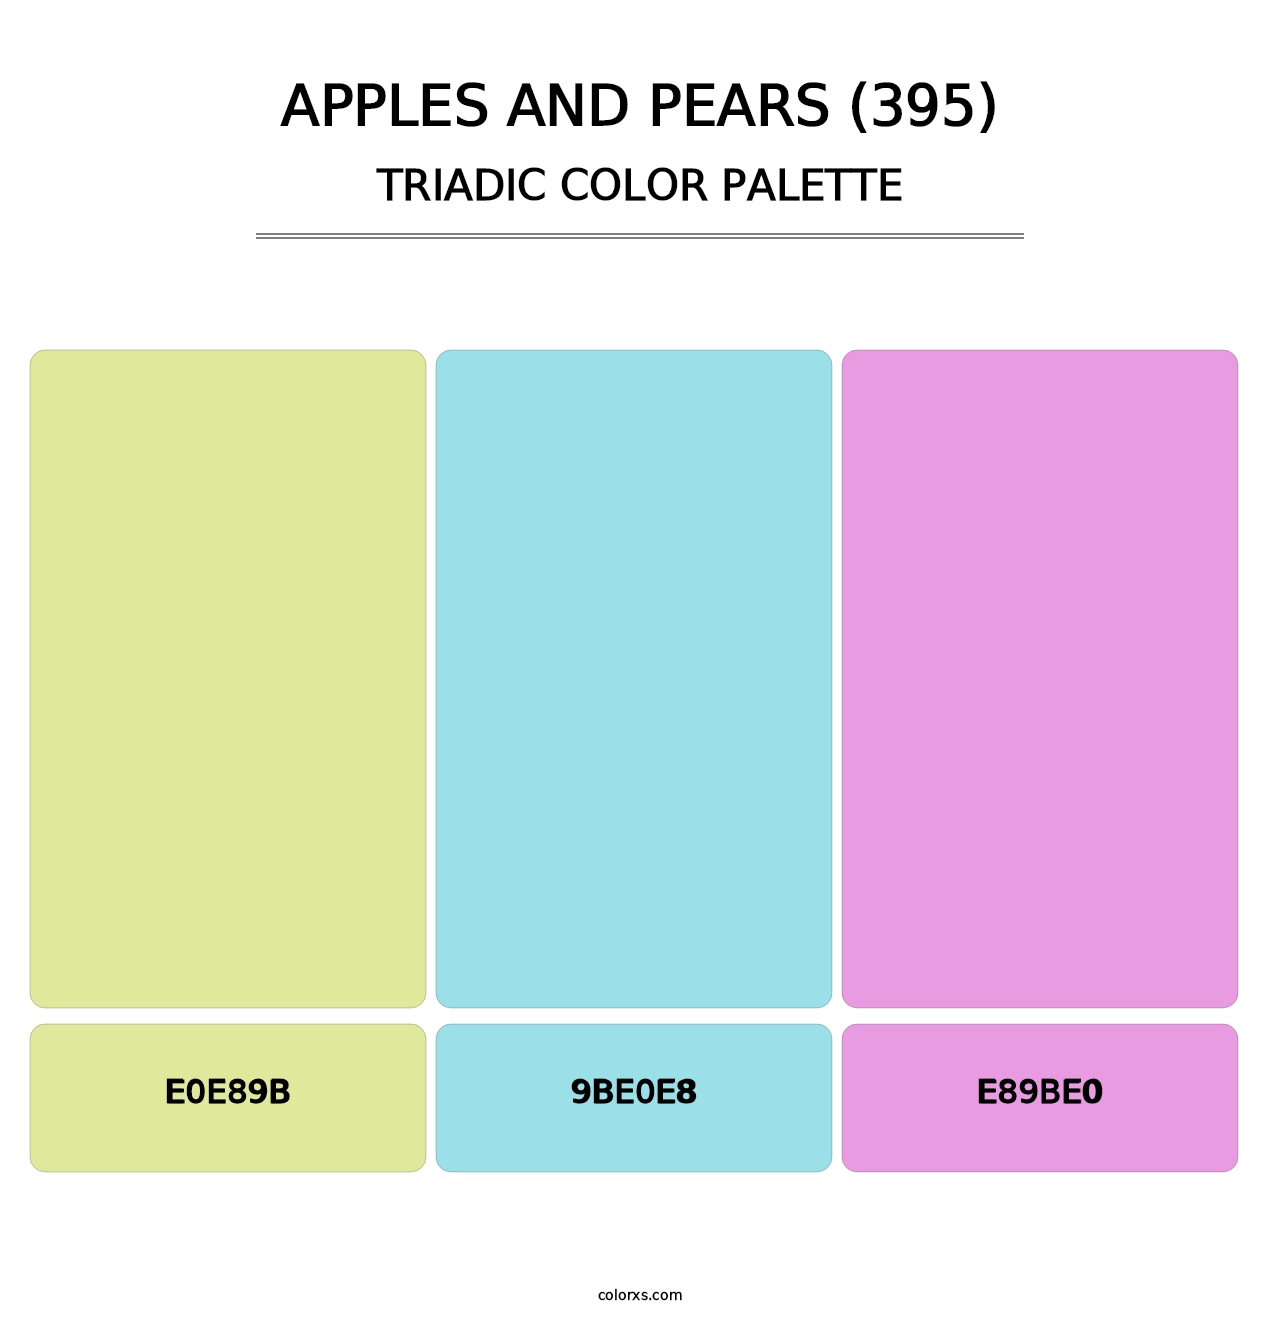 Apples and Pears (395) - Triadic Color Palette